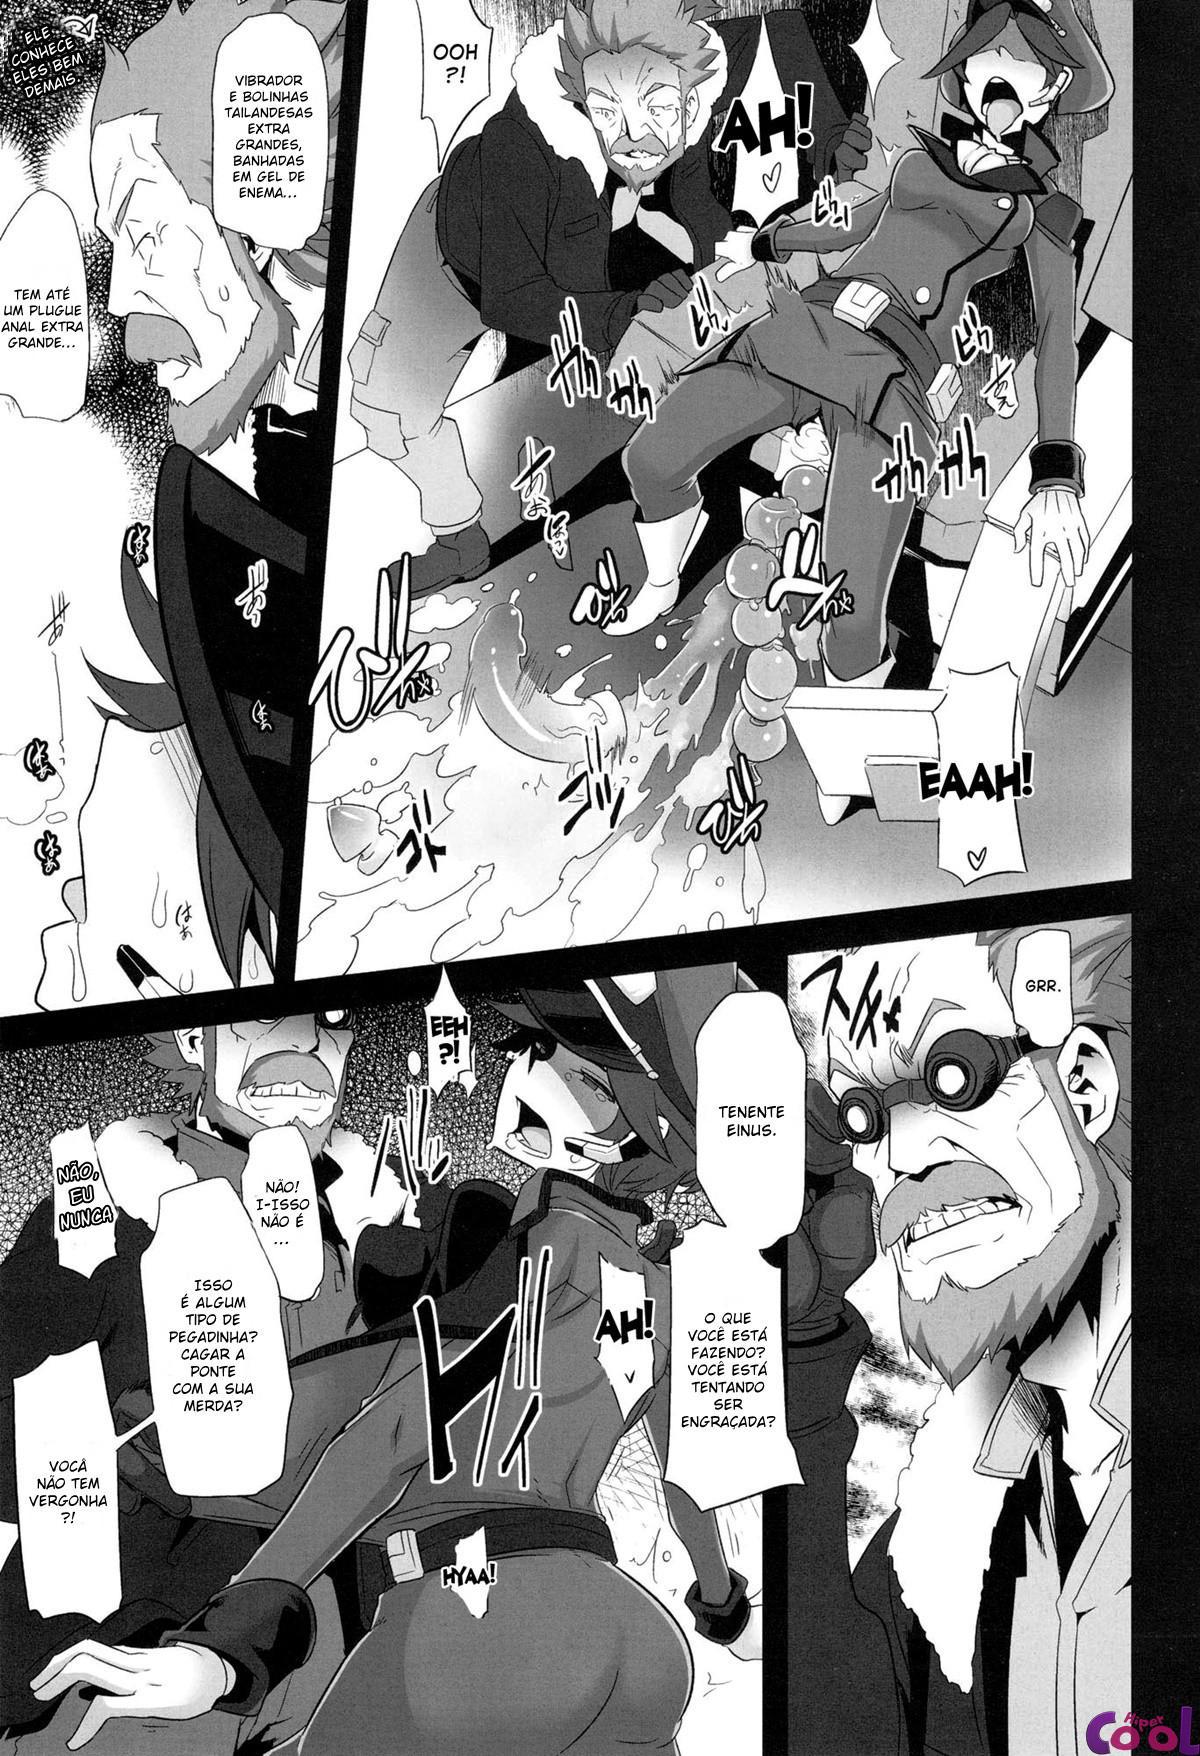 dame-kanchou-or-useless-captain-chapter-01-page-14.jpg